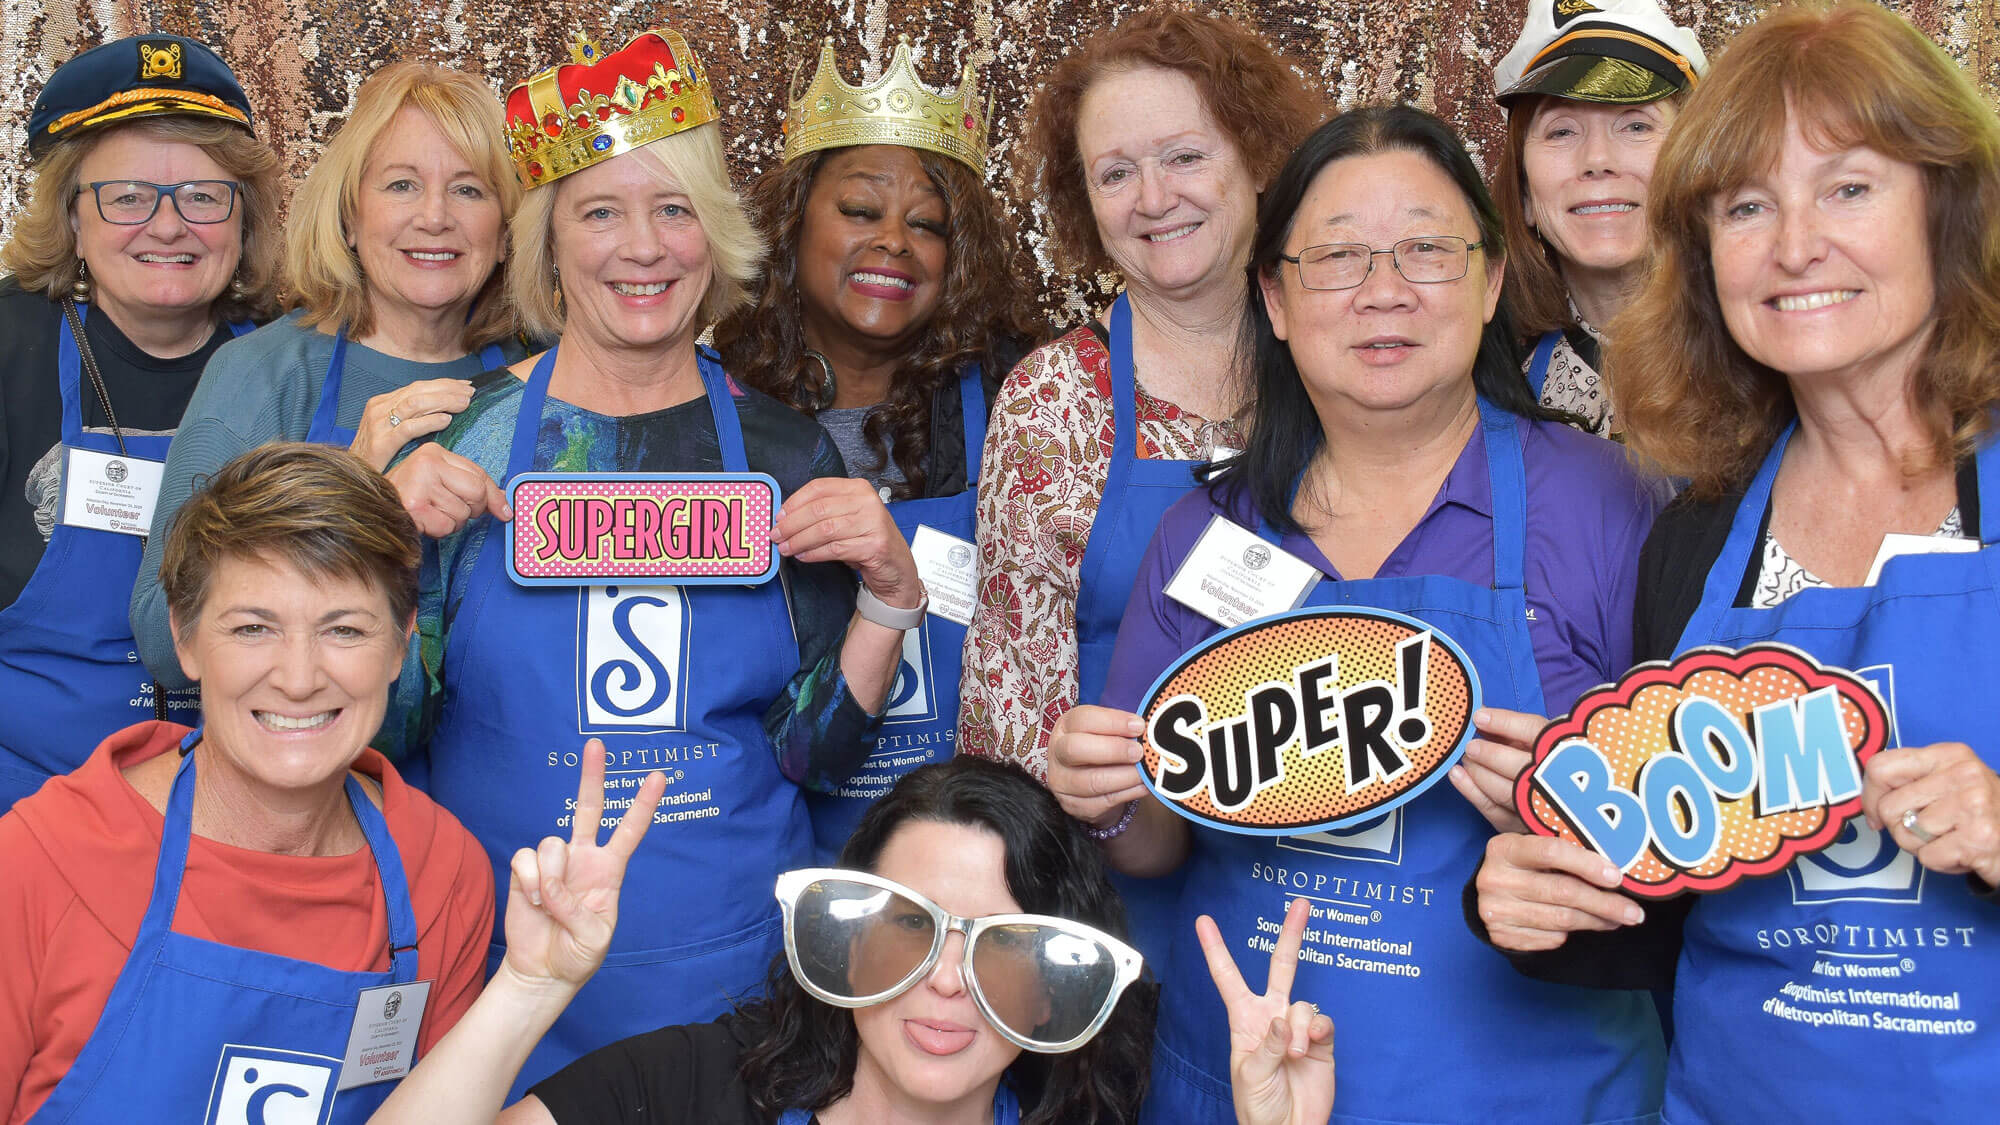 Close-up of a group of middle-aged women wearing blue Soroptimist aprons, all smiling at the camera while some hold up comic-style signs that say "Supergirl", "Super" and "Boom".